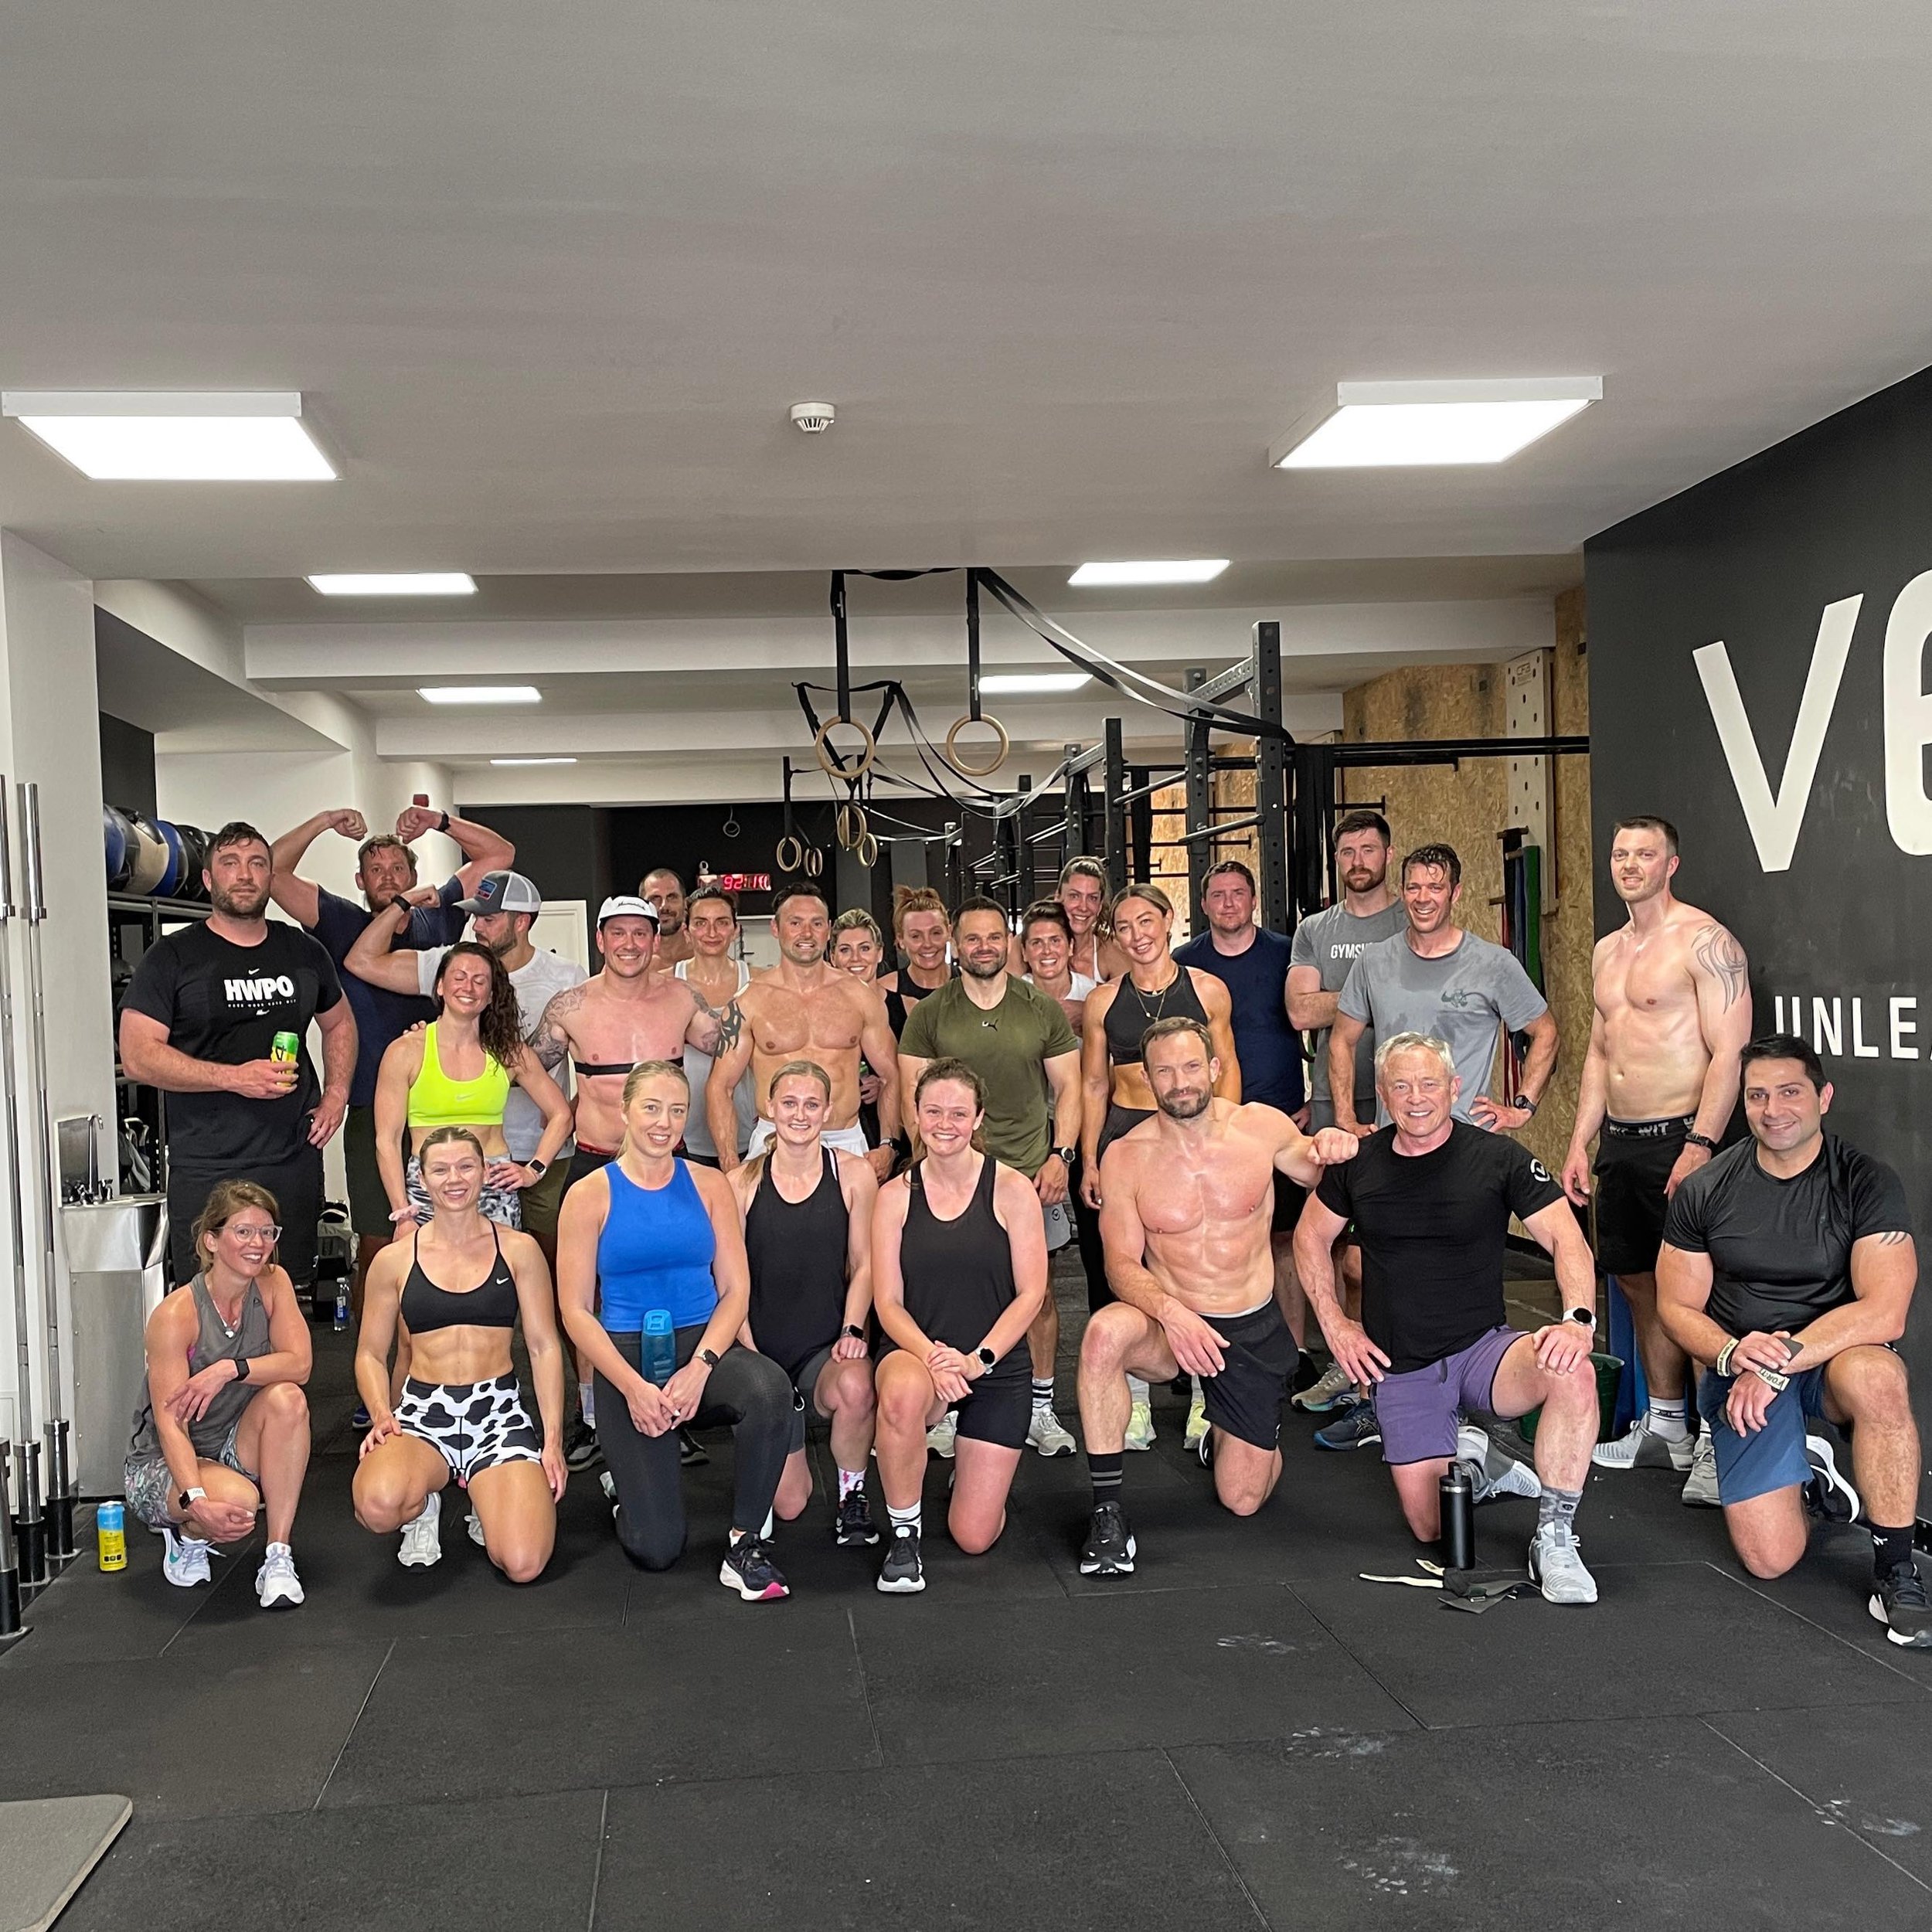 Well that was a fun 90min workout. 

Well done everyone and a great turn out as always. 

Lots of running and gymnastic volume which shows great progress from all 🙌

Enjoy the sun and make sure you have good stretch over the weekend ready for phase 